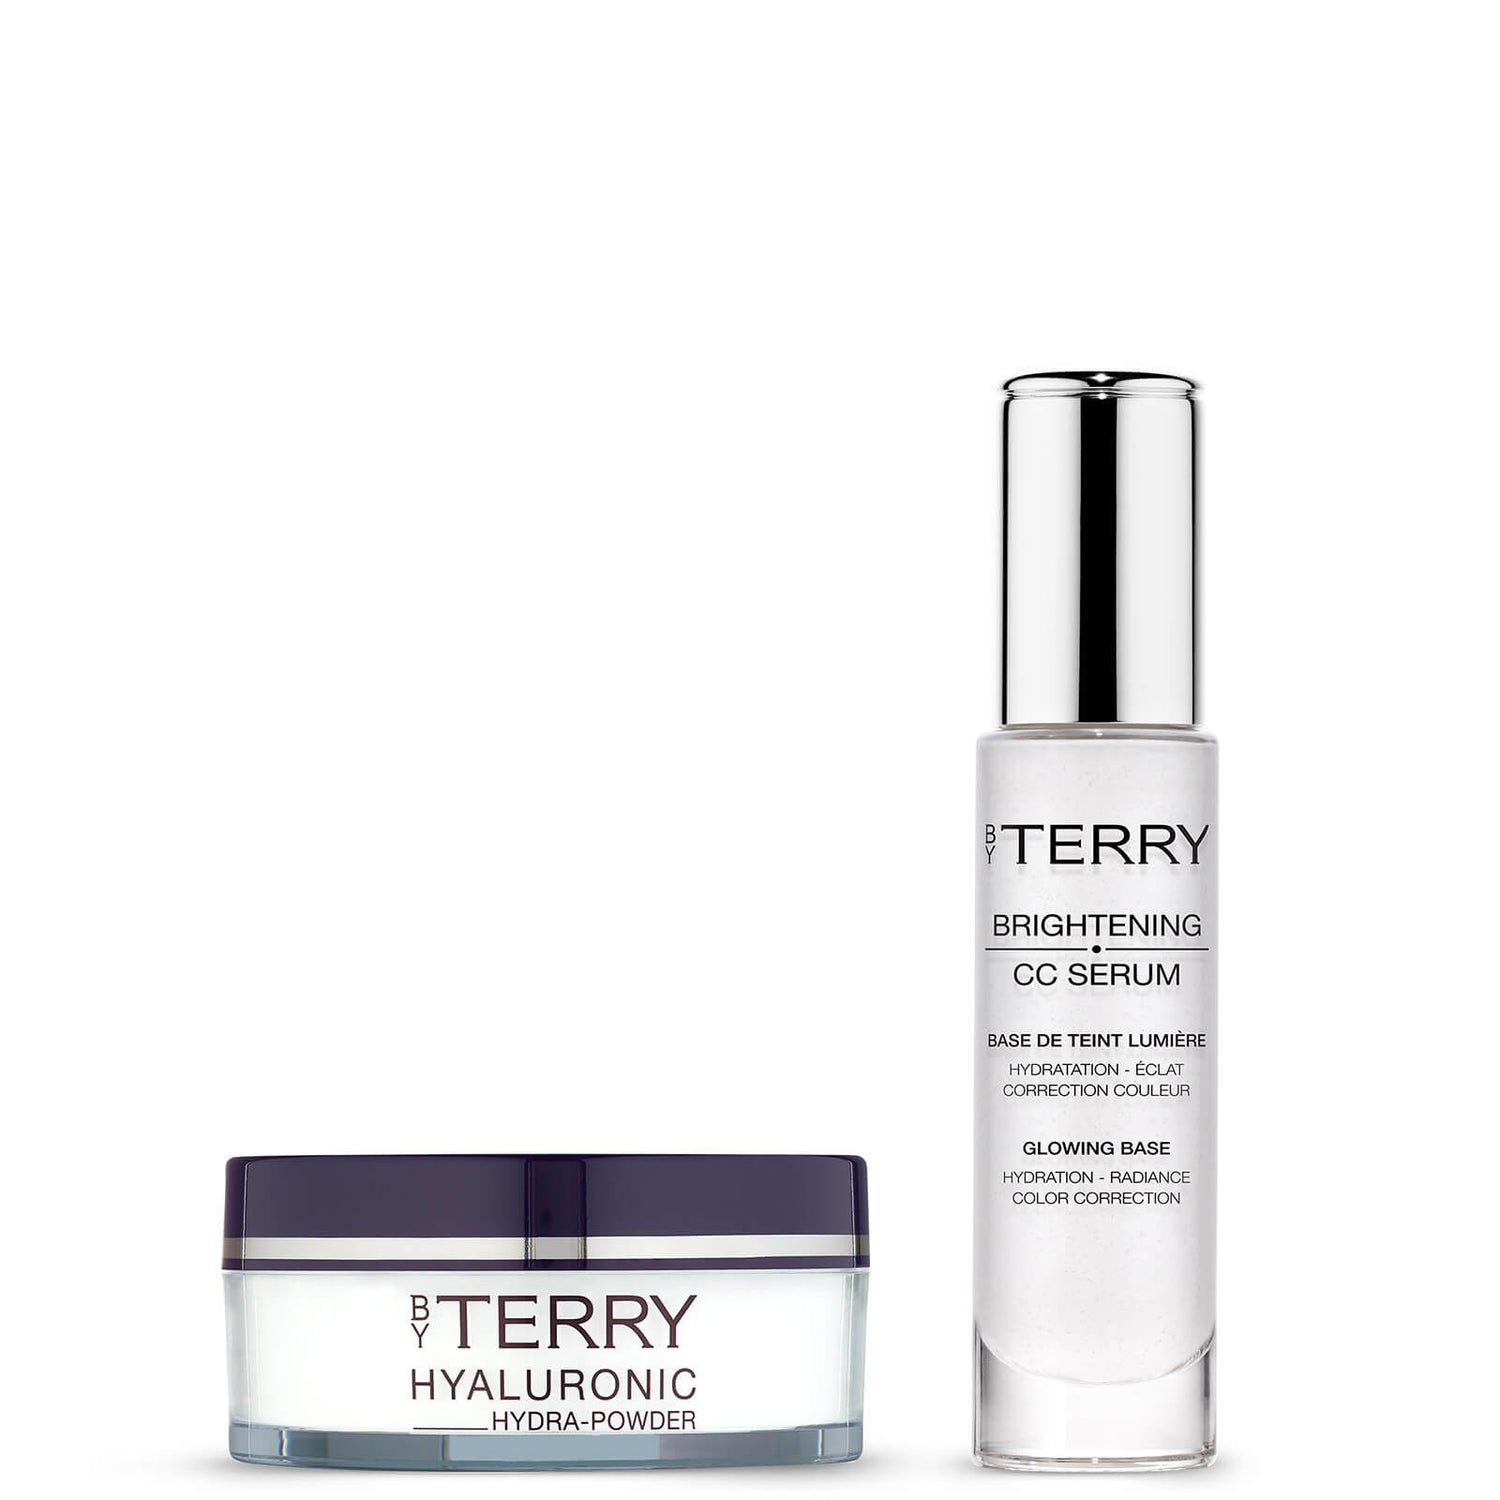 Siero CC Hyaluronic Hydra-Powder and Cellularose - No.1 Set Immaculate Light By Terry